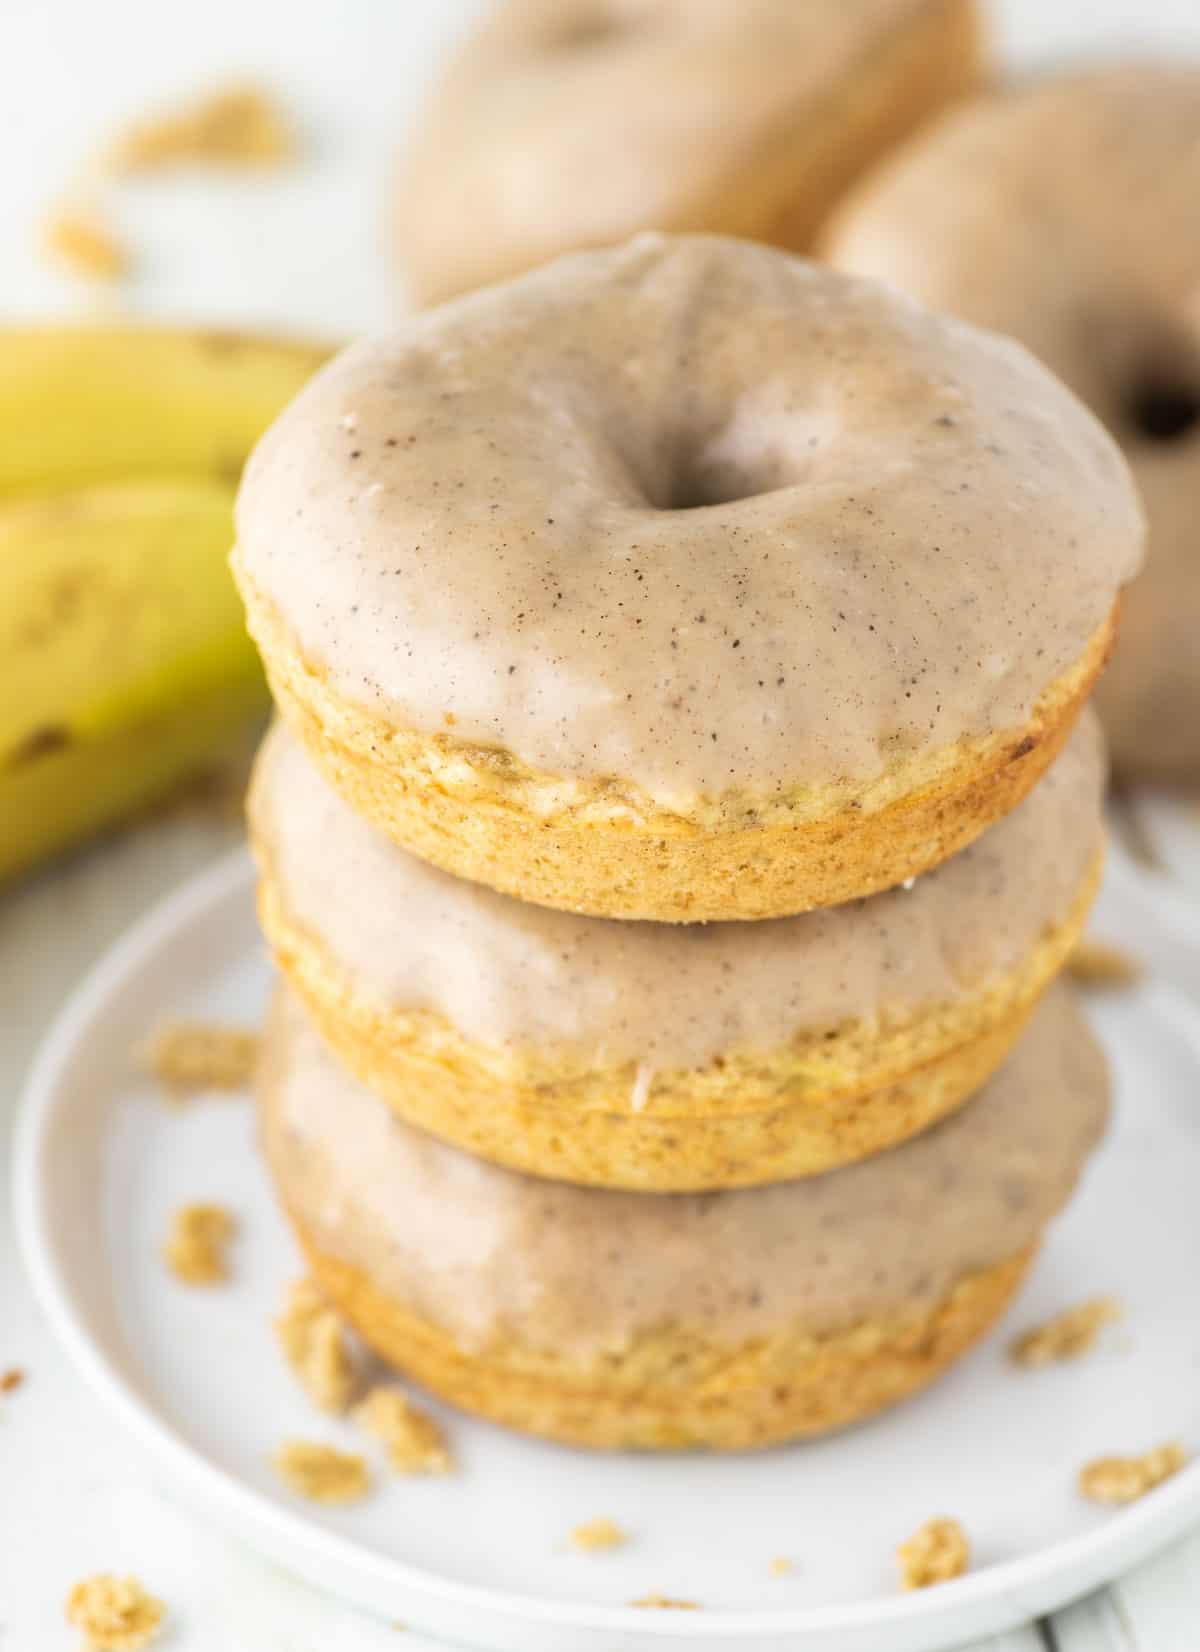 3 stacked banana donuts with brown butter glaze on plate